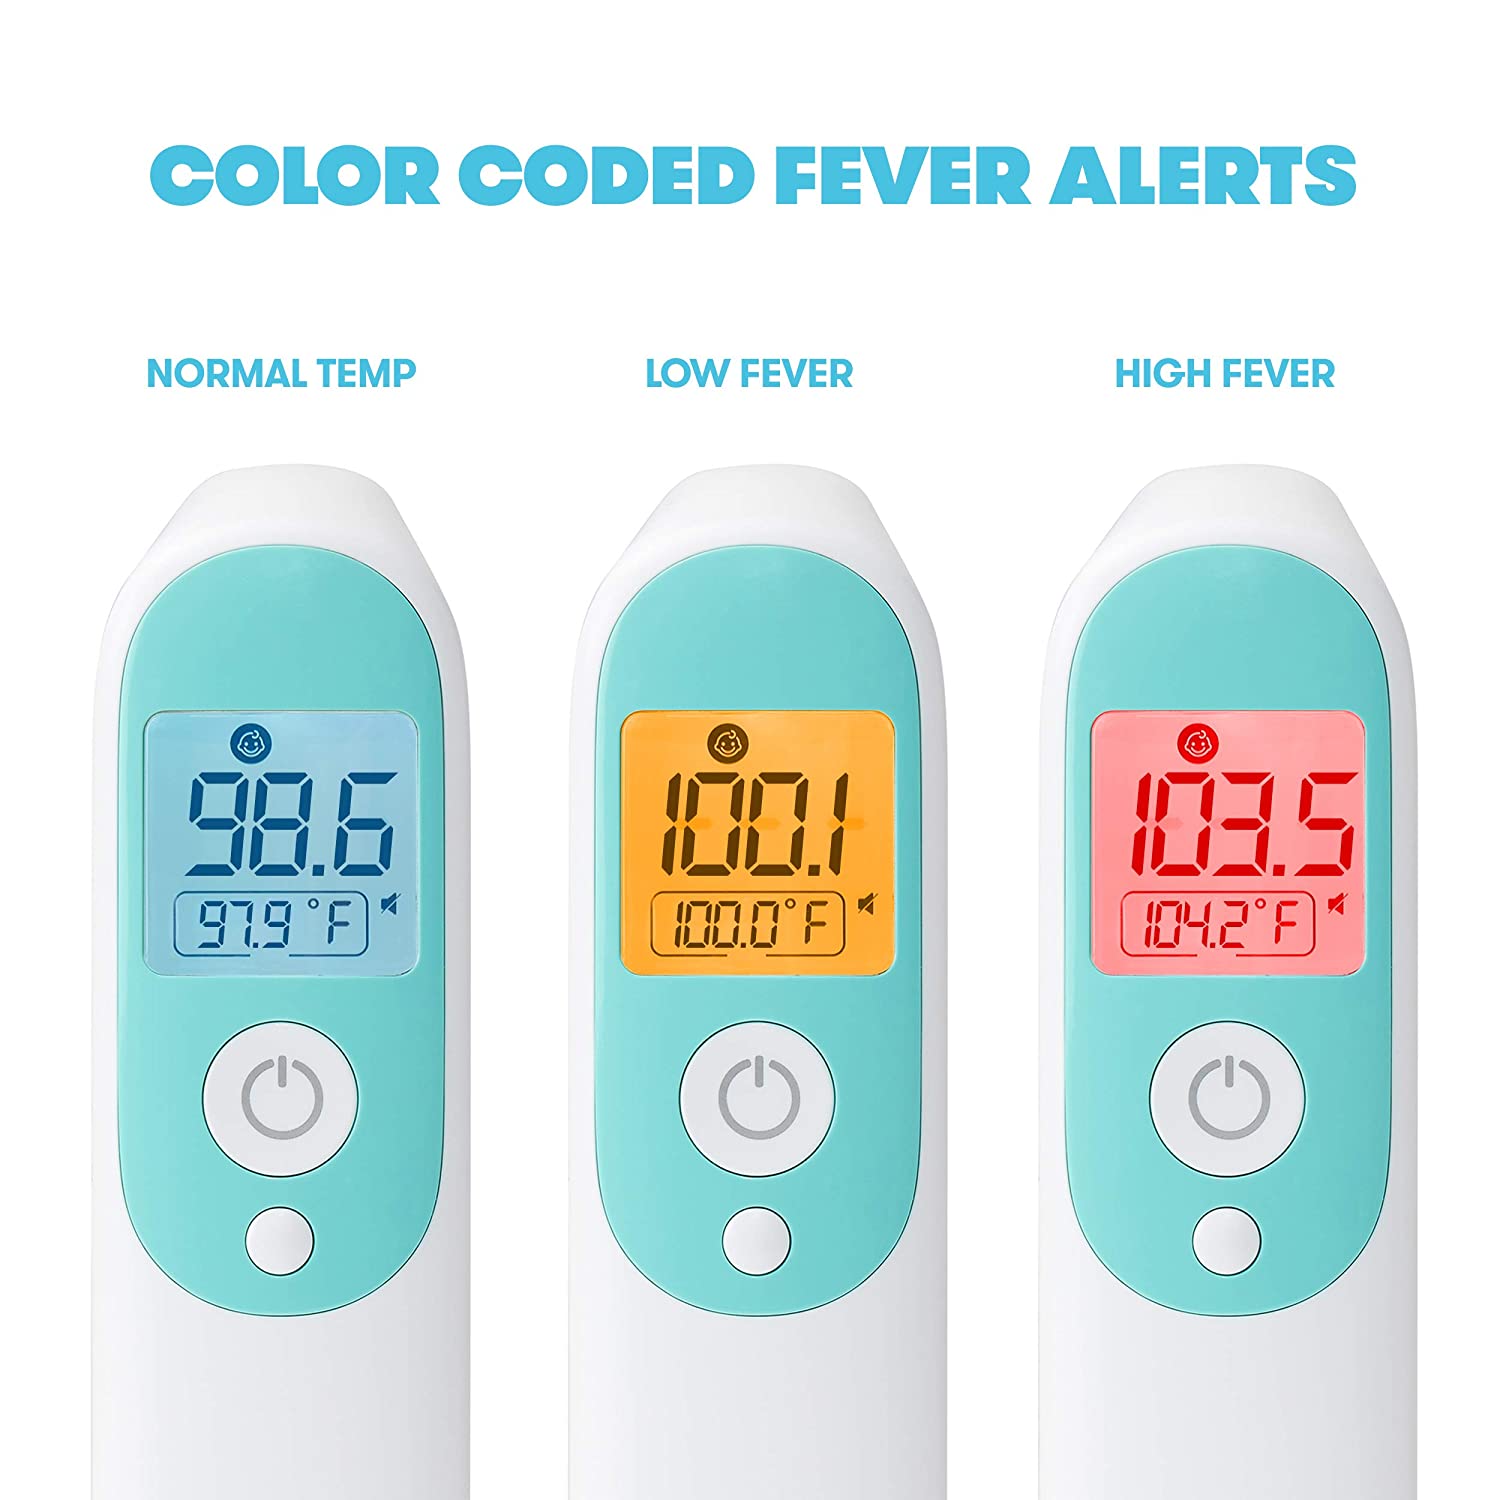 3-in-1 Touchless Thermometer